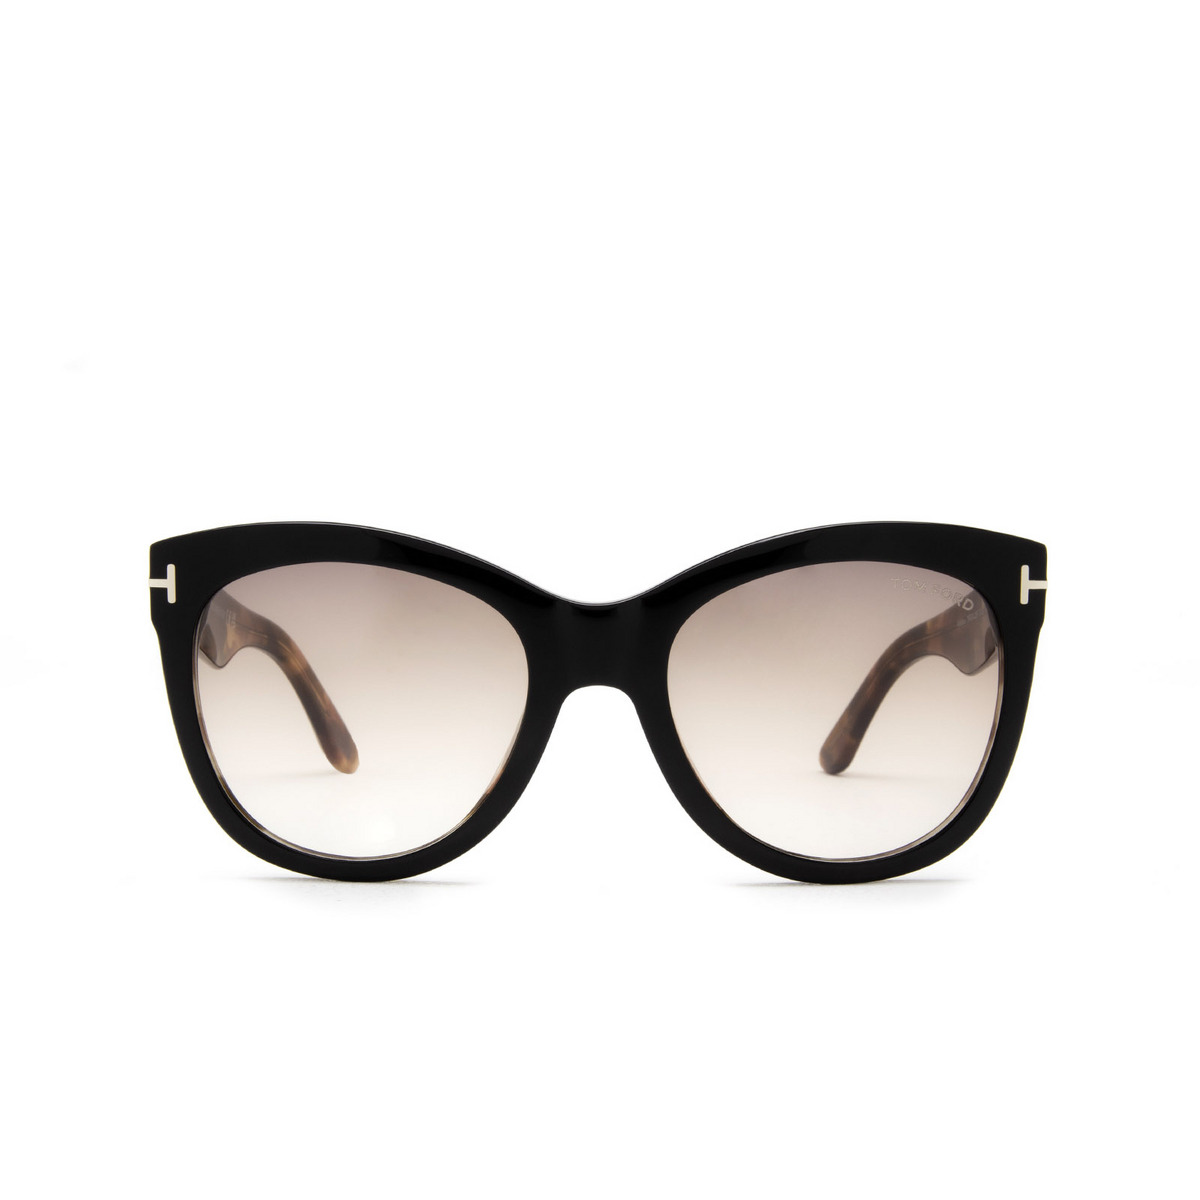 Tom Ford WALLACE Sunglasses 05F Black & Havana - front view